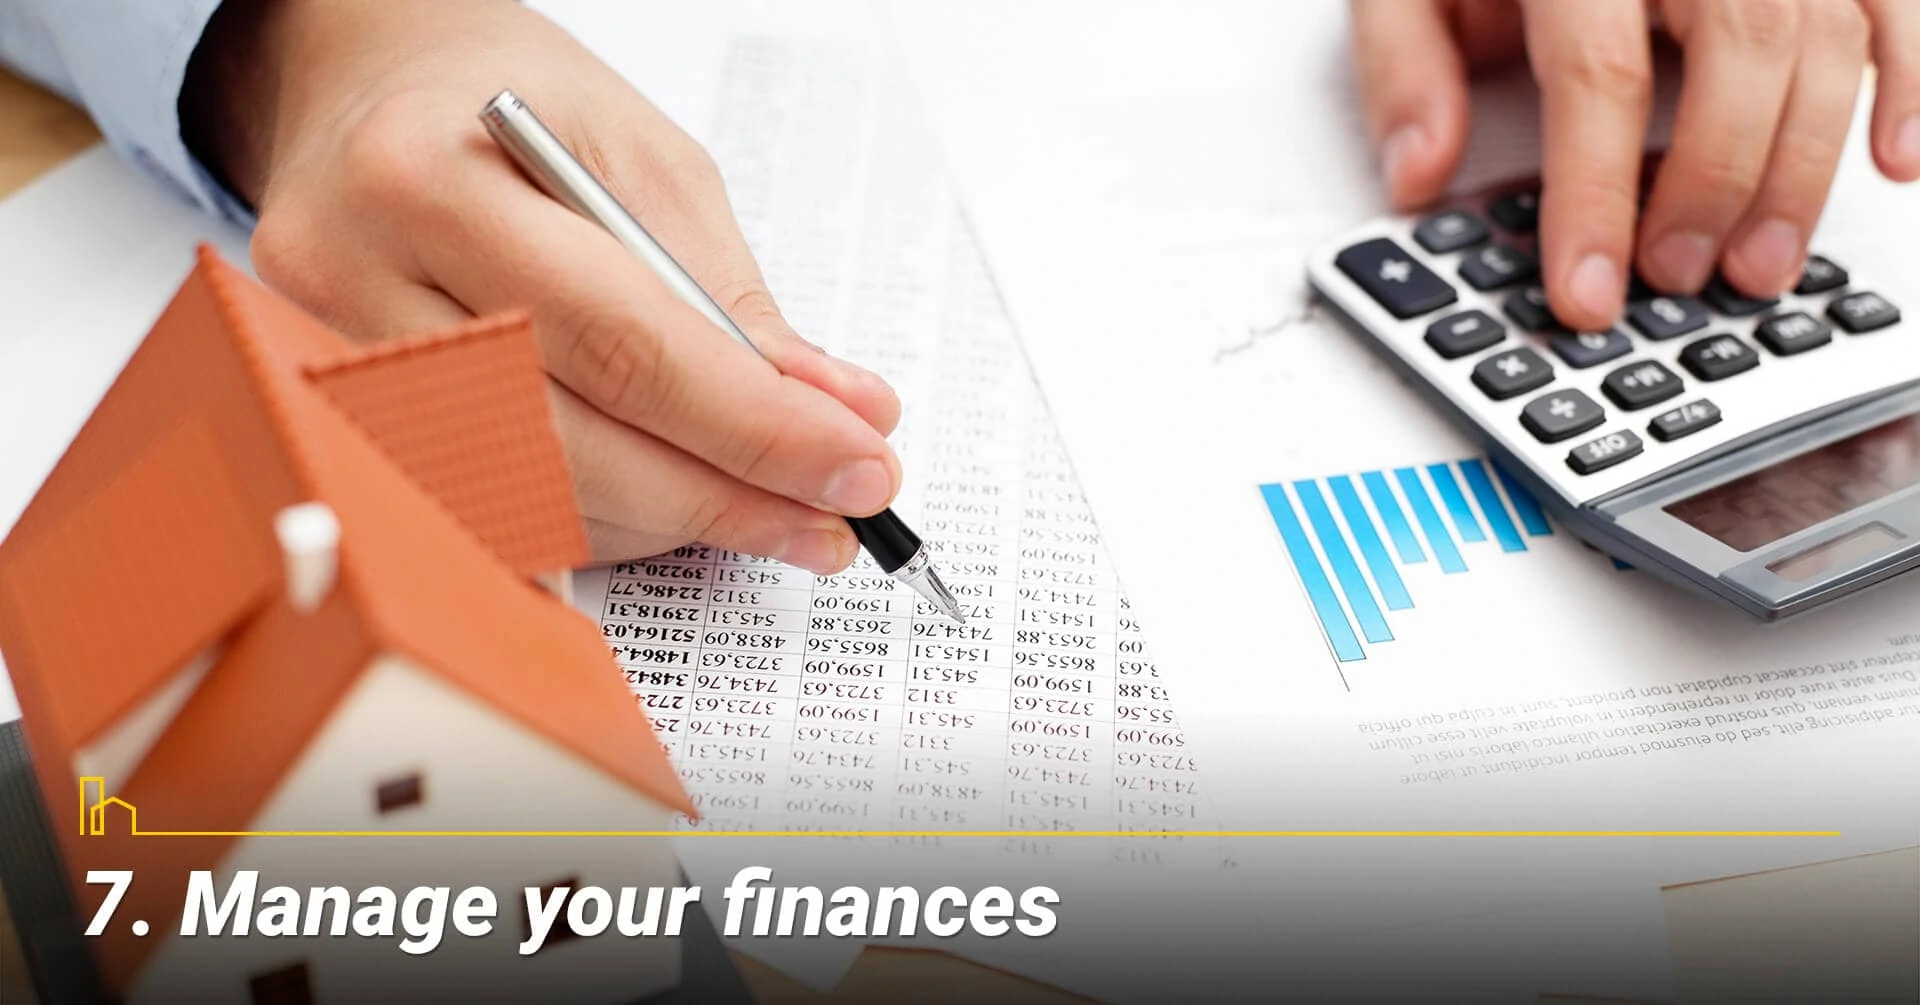 Manage your finances, keep track of your money